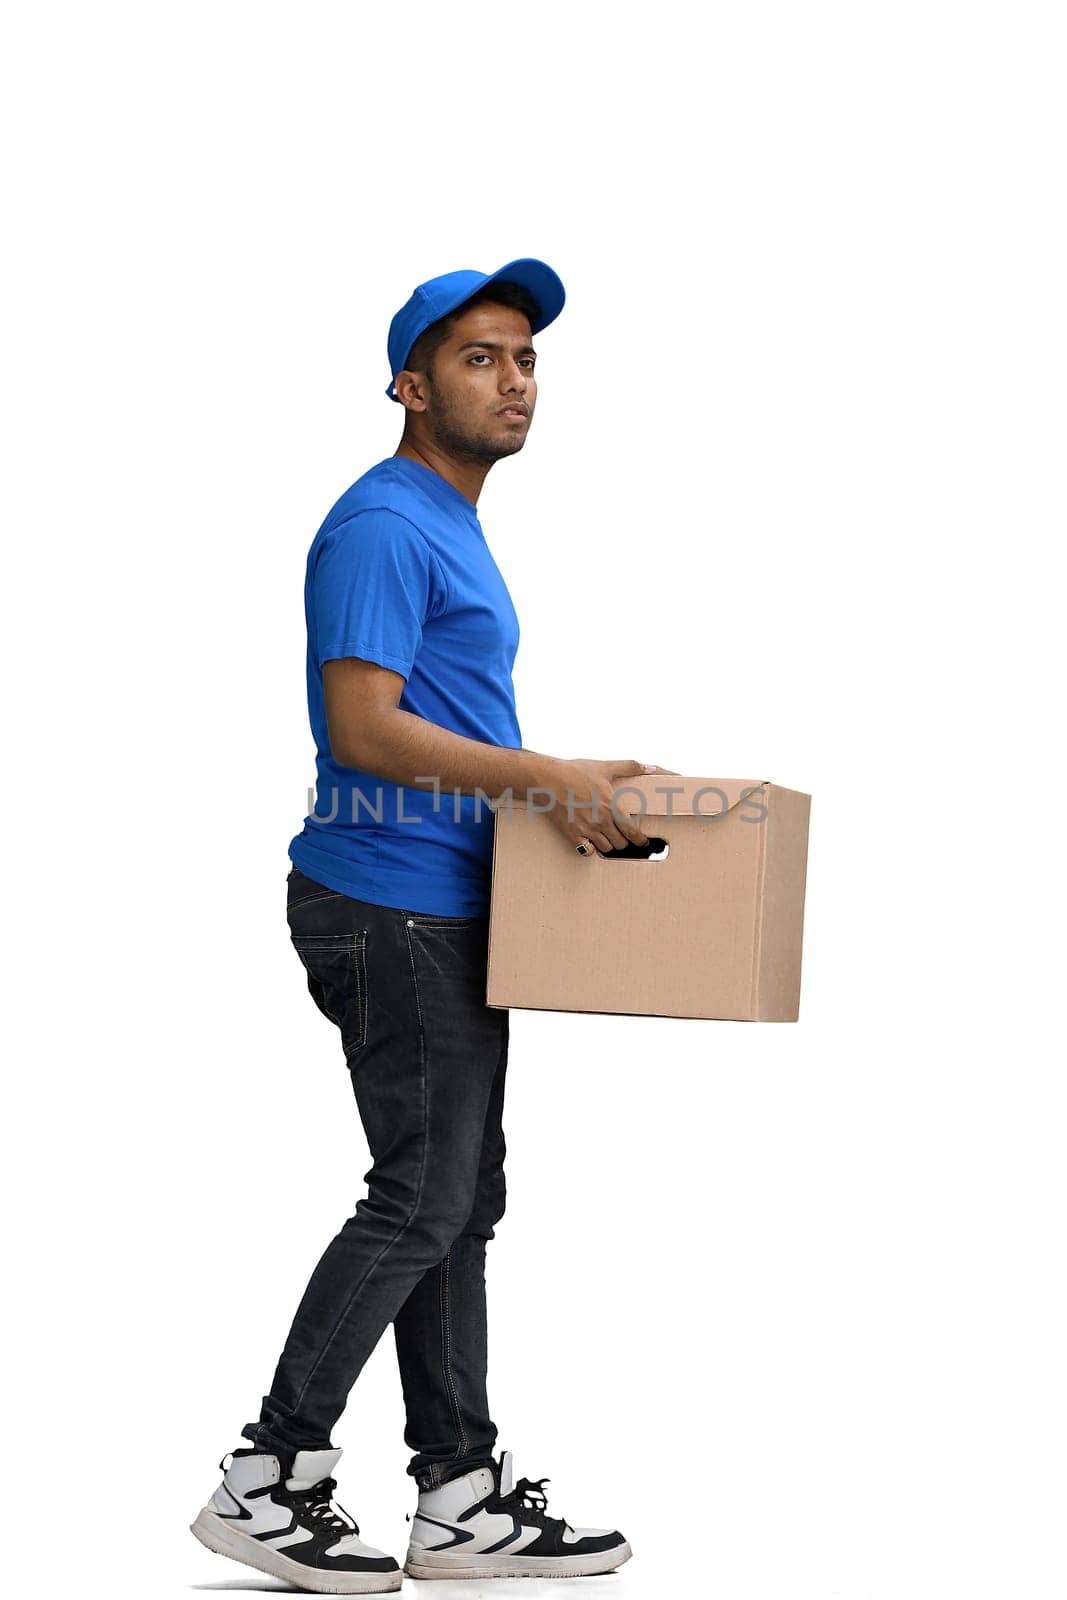 A man on a white background give box.